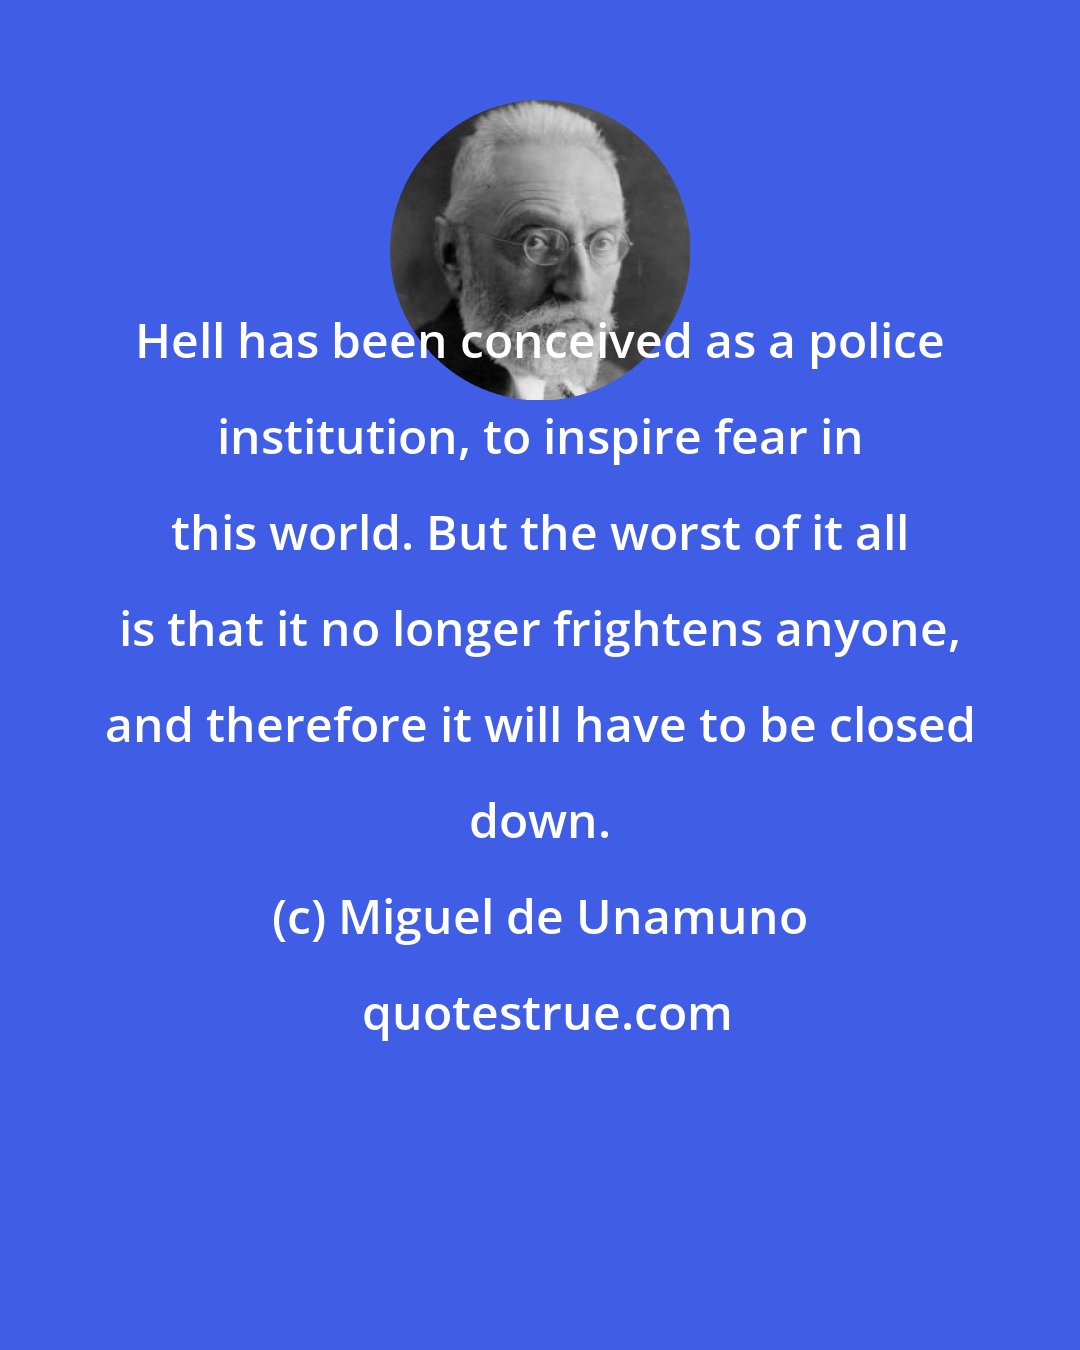 Miguel de Unamuno: Hell has been conceived as a police institution, to inspire fear in this world. But the worst of it all is that it no longer frightens anyone, and therefore it will have to be closed down.